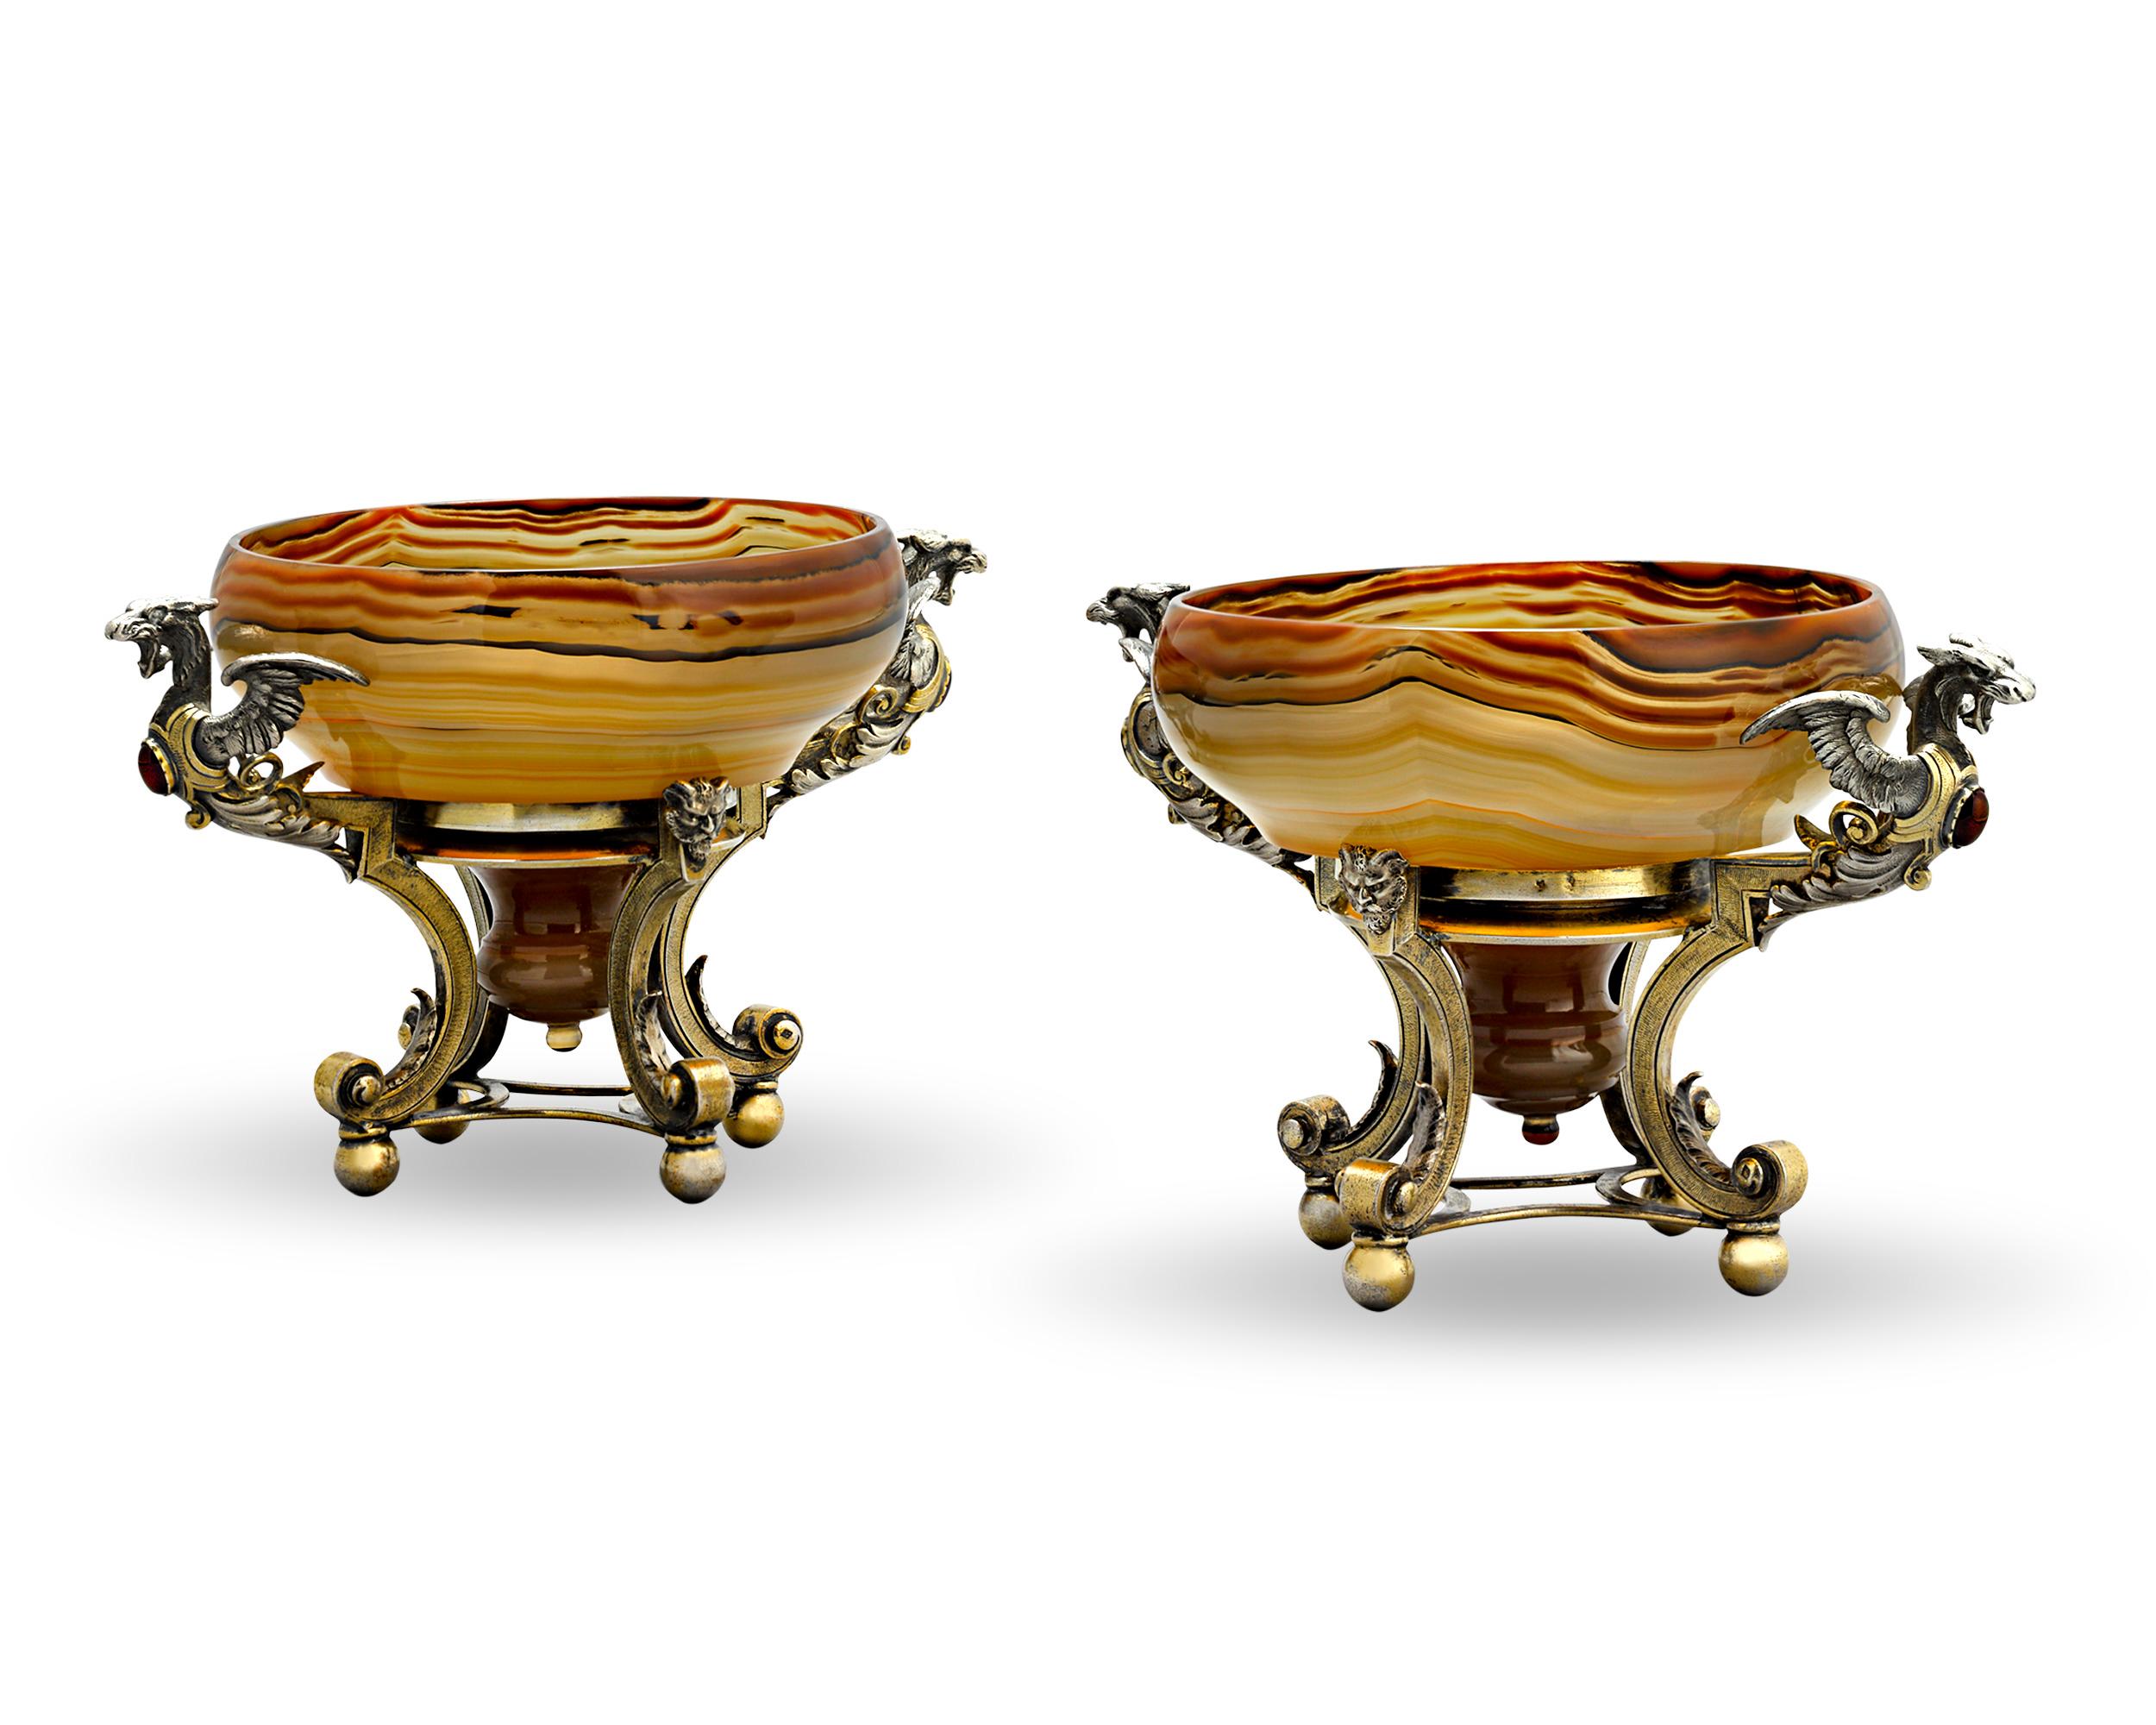 This stunning pair of silver and agate tazzas by prominent Parisian goldsmith and jeweler Jules Wiese exhibits a classical elegance. The warm beauty of the banded agate is complemented perfectly by the raised silver mounts which are crafted in the